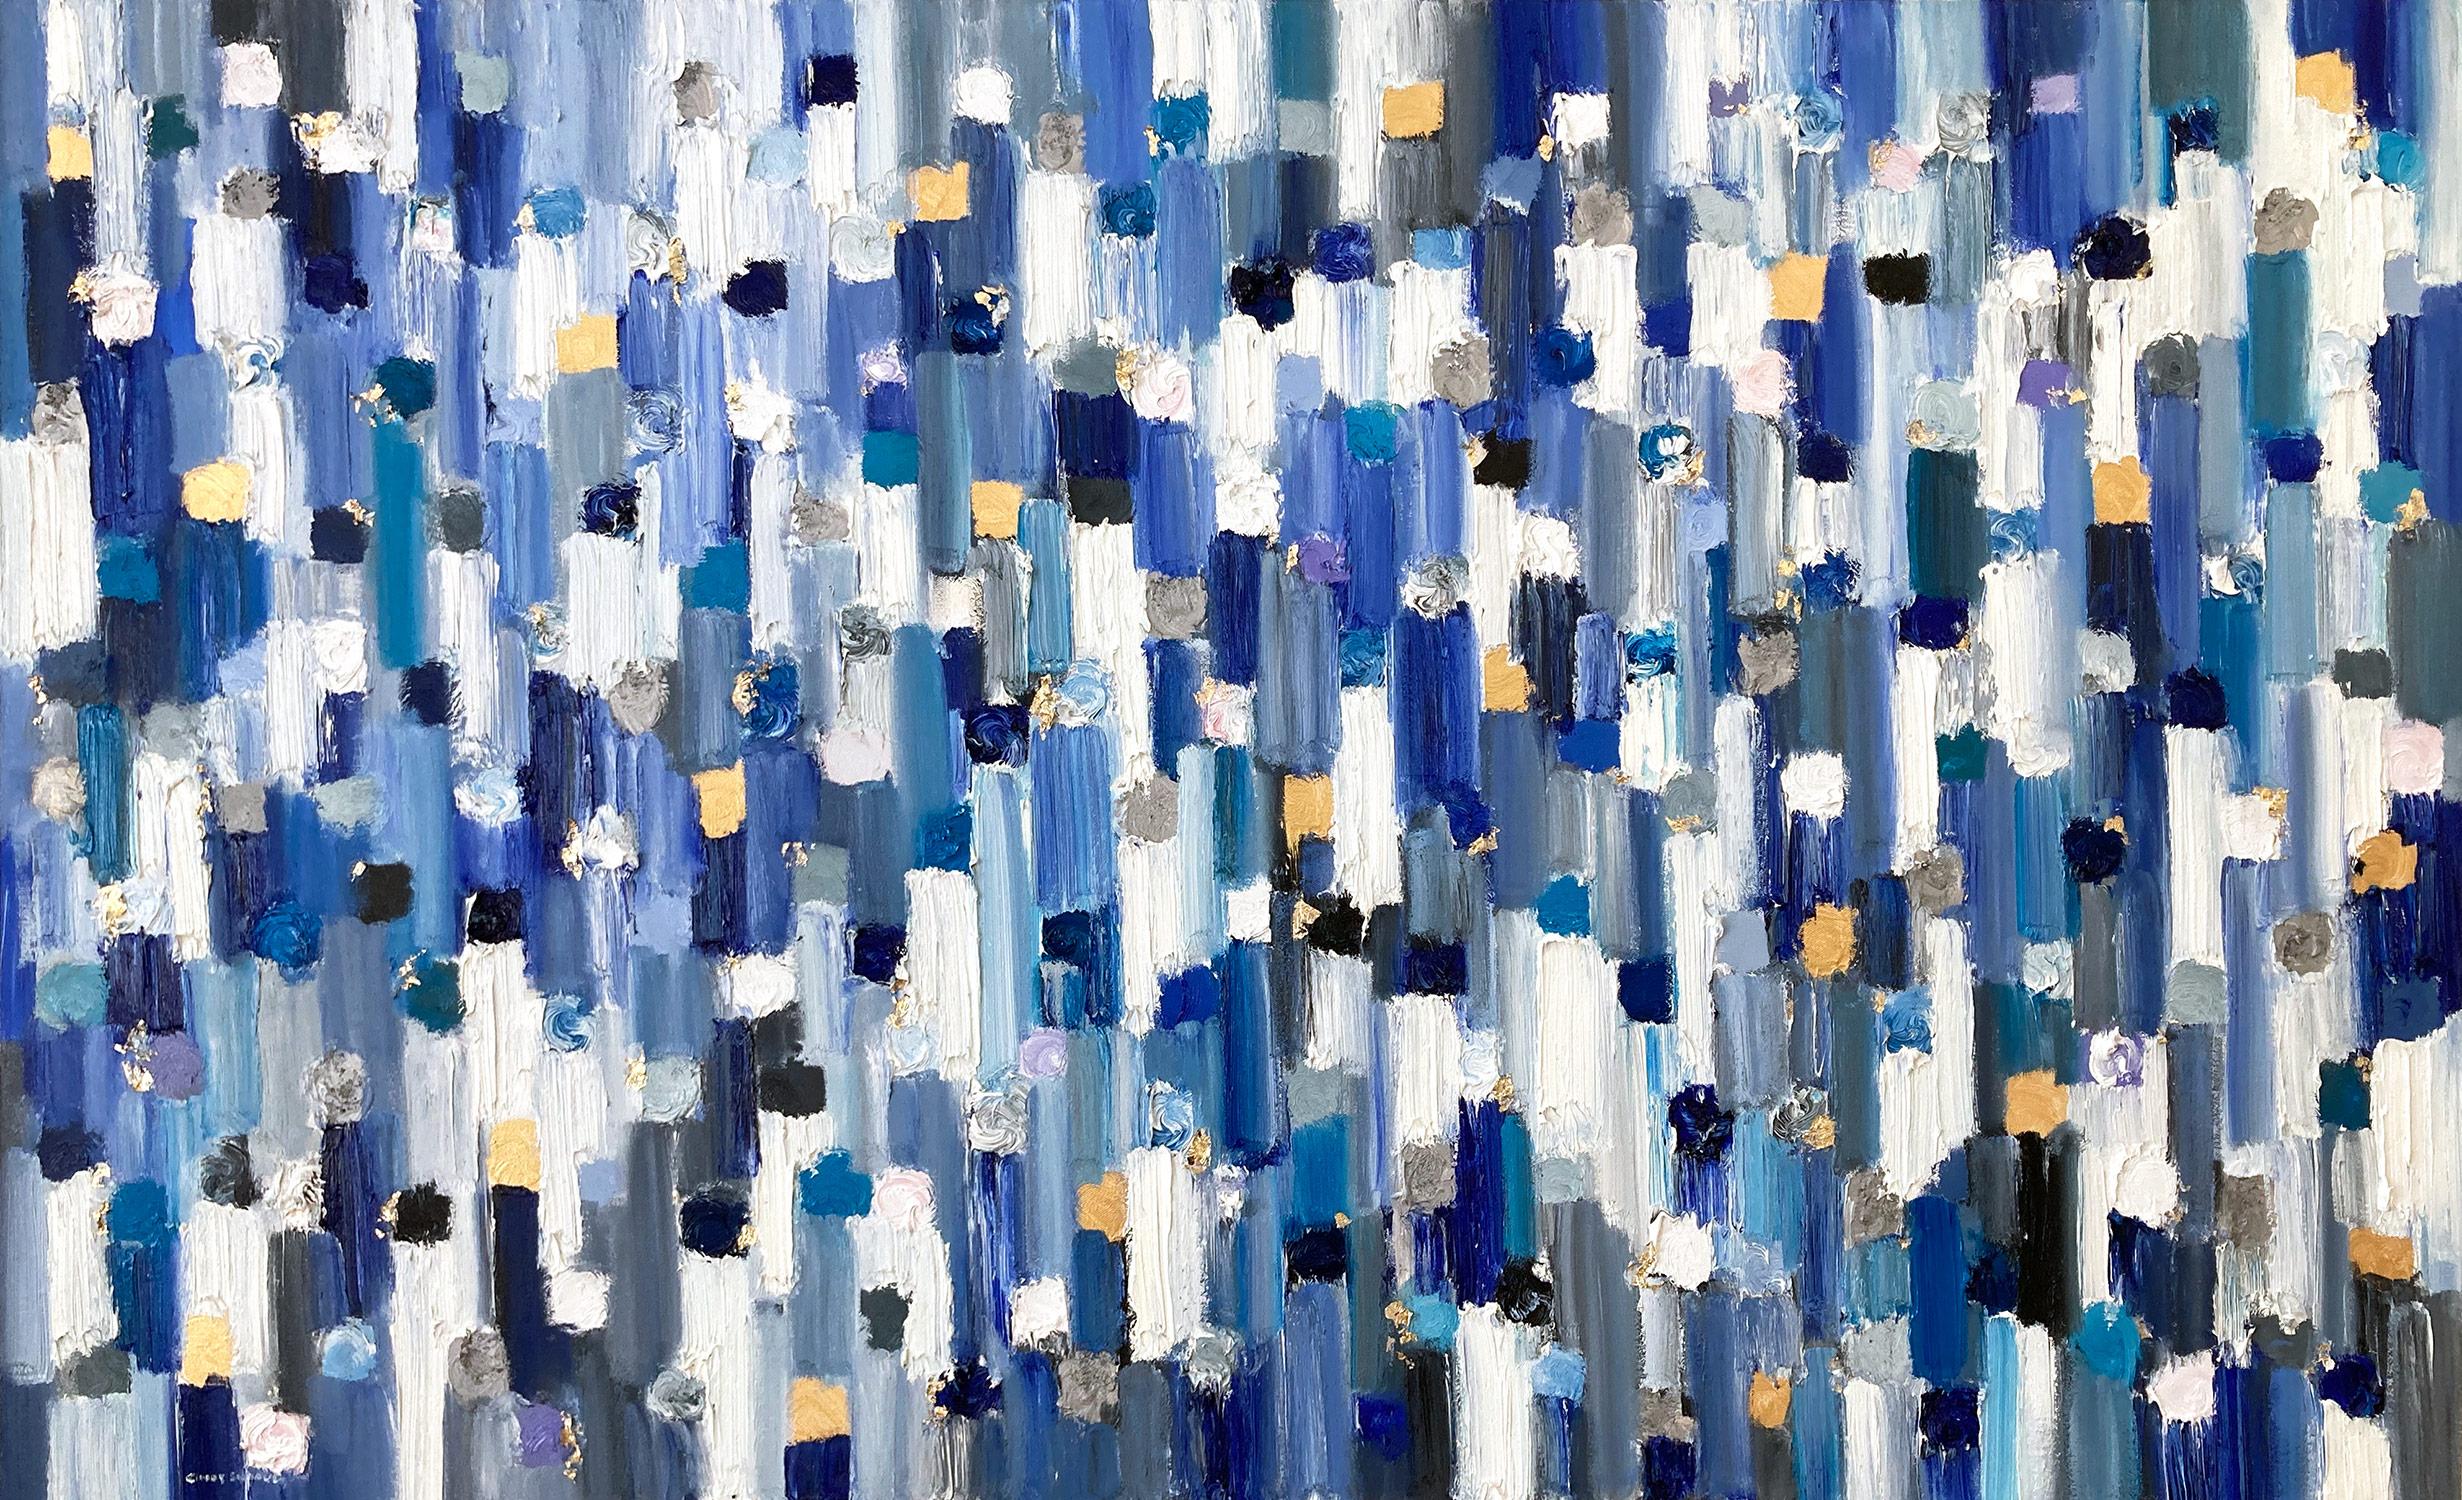 Cindy Shaoul Abstract Painting - "Dripping Dots - Mont Blanc" Contemporary Oil Painting on Canvas w Gold Leaf